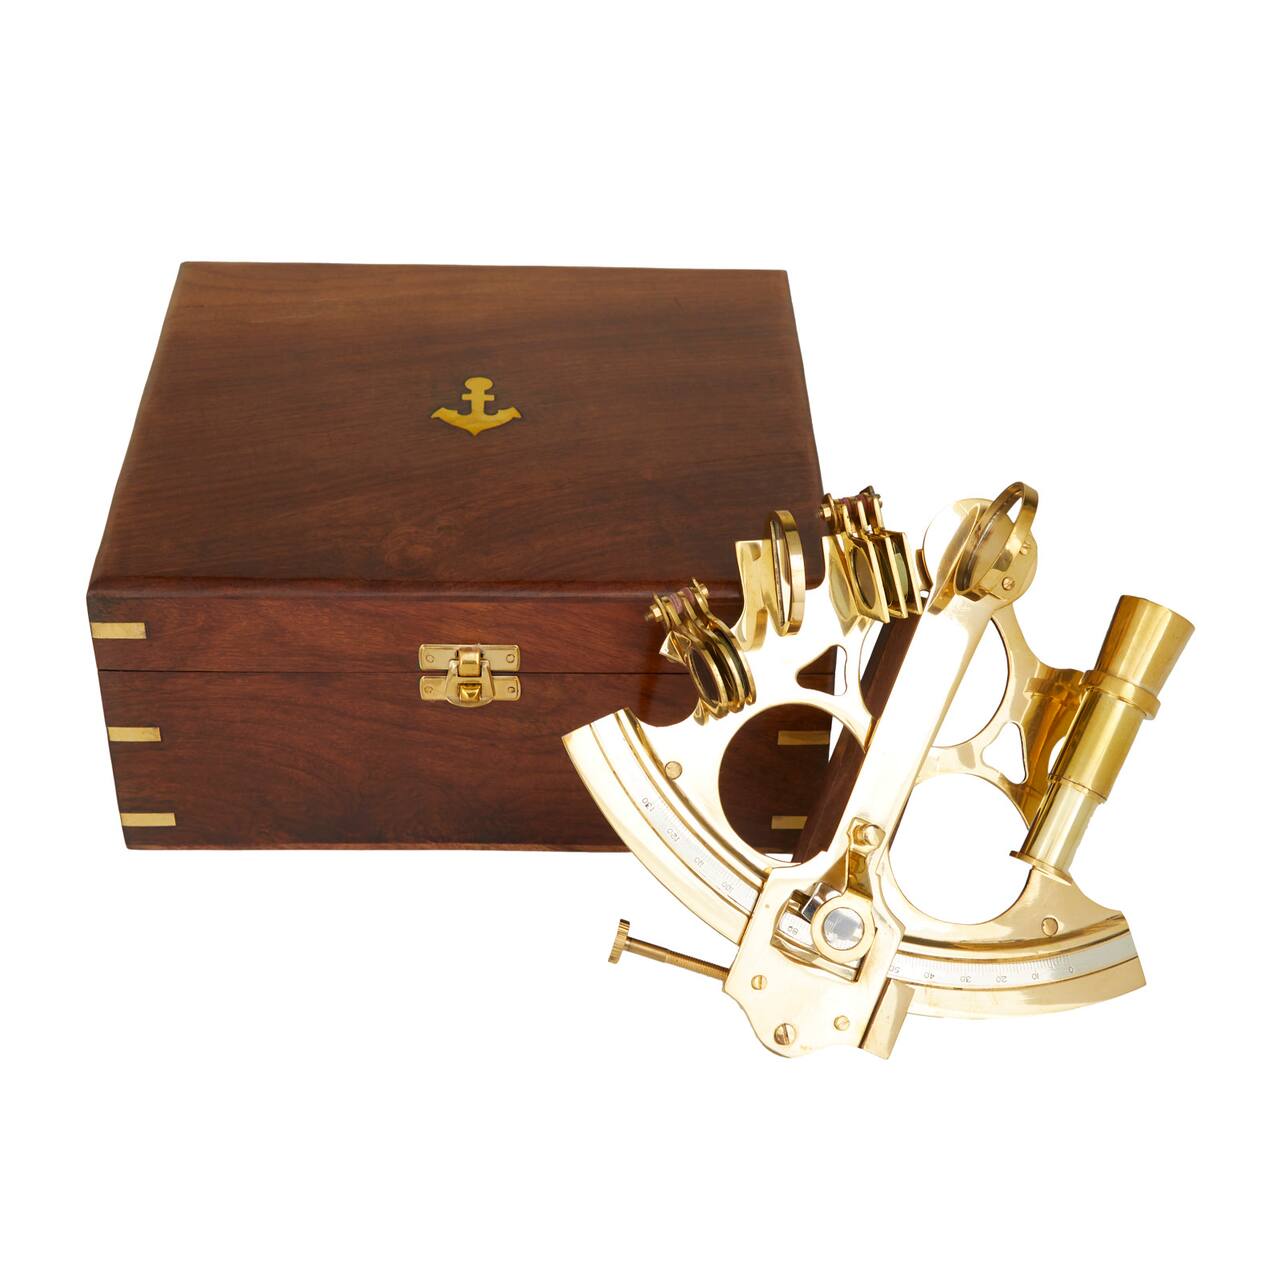 7 Gold Brass Sextant Compass with Decorative Wood Box